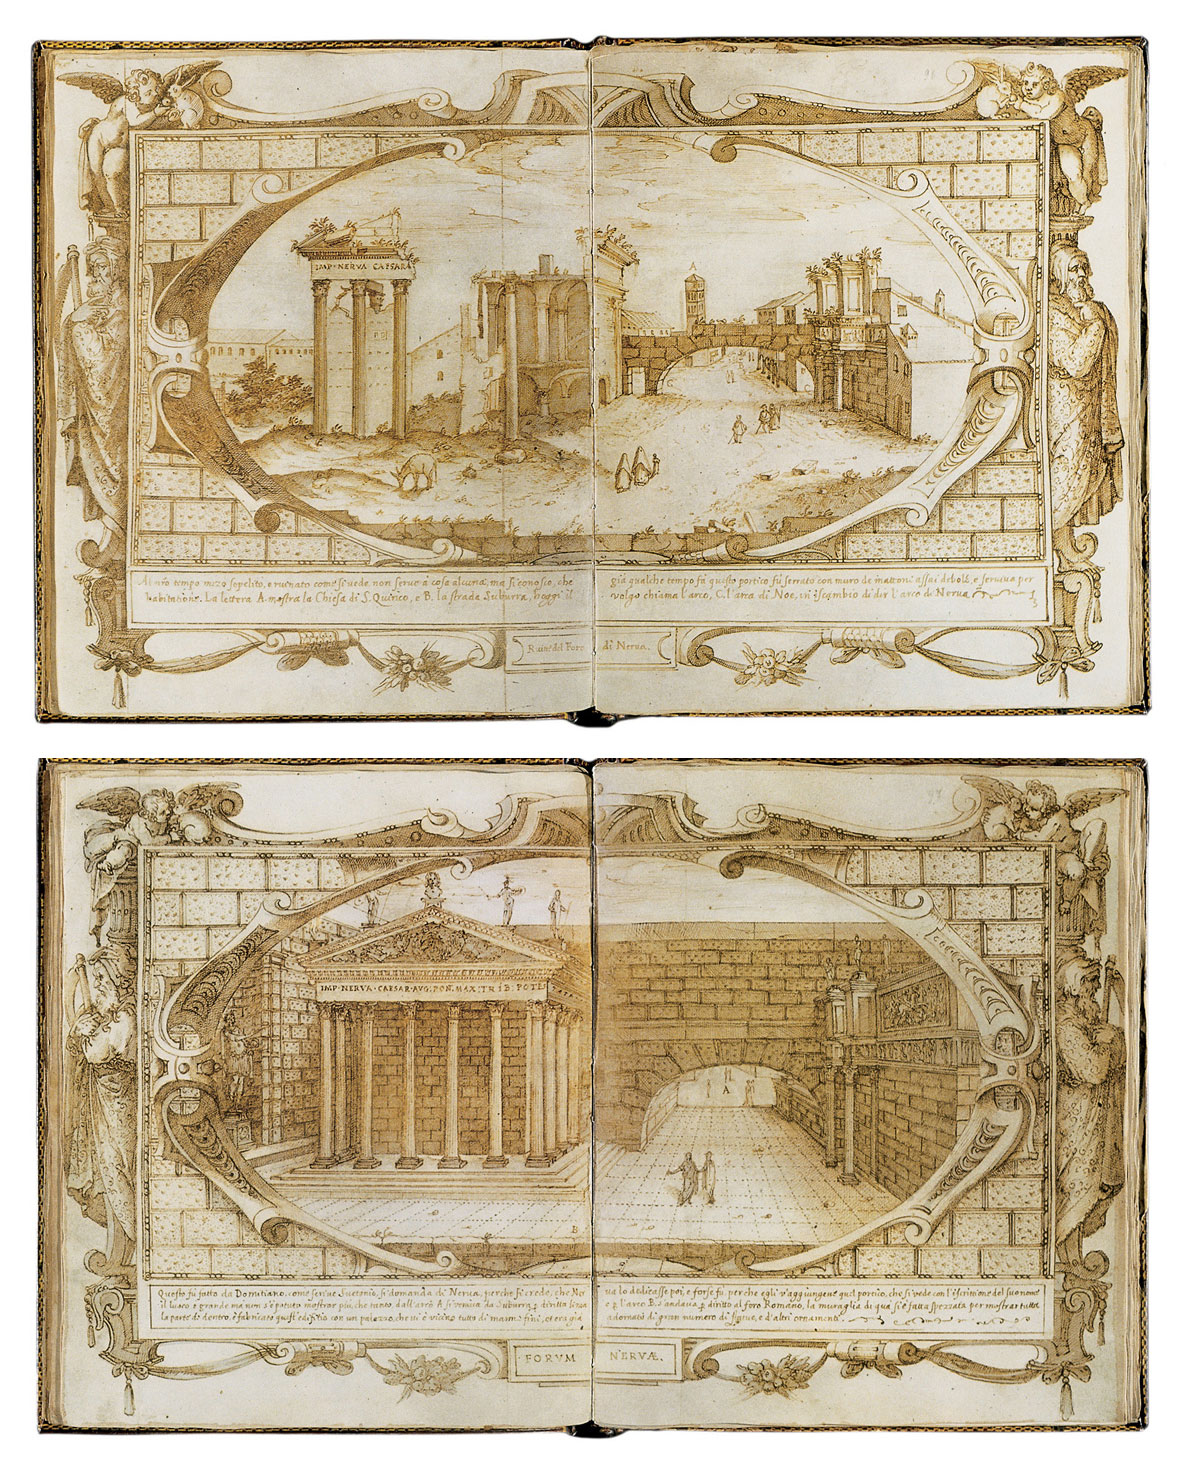 Two mid-sixteenth-century illustrations by Étienne Du Perác Pérac’s showing views of the Forum of Nerva. 